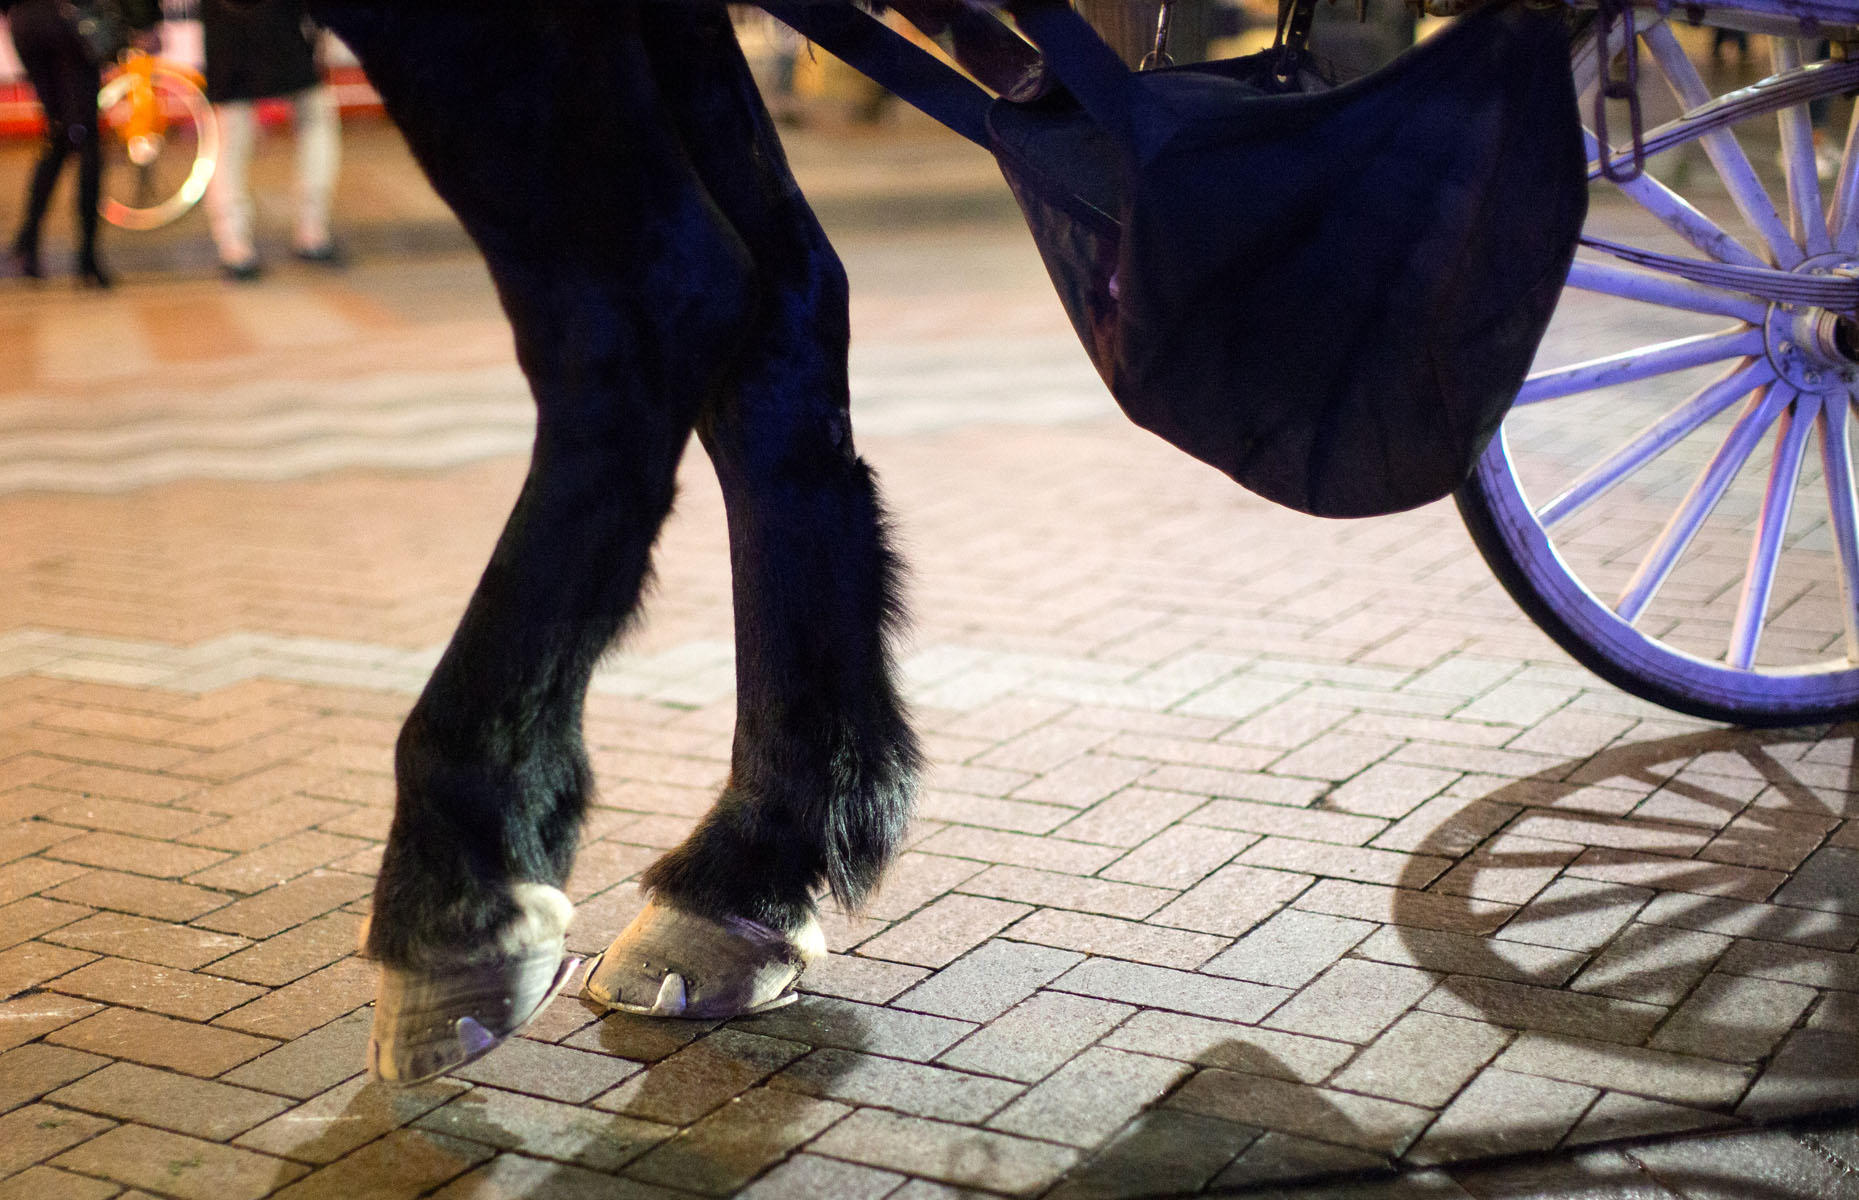 Amos, an 11 year-old Percheron draft horse sports horse shoes and pads made of rubber and steel while working the city streets for Steve Beckmann of Sealth Horse Carriages in Seattle, WA on December 17, 2017. (© Karen Ducey)